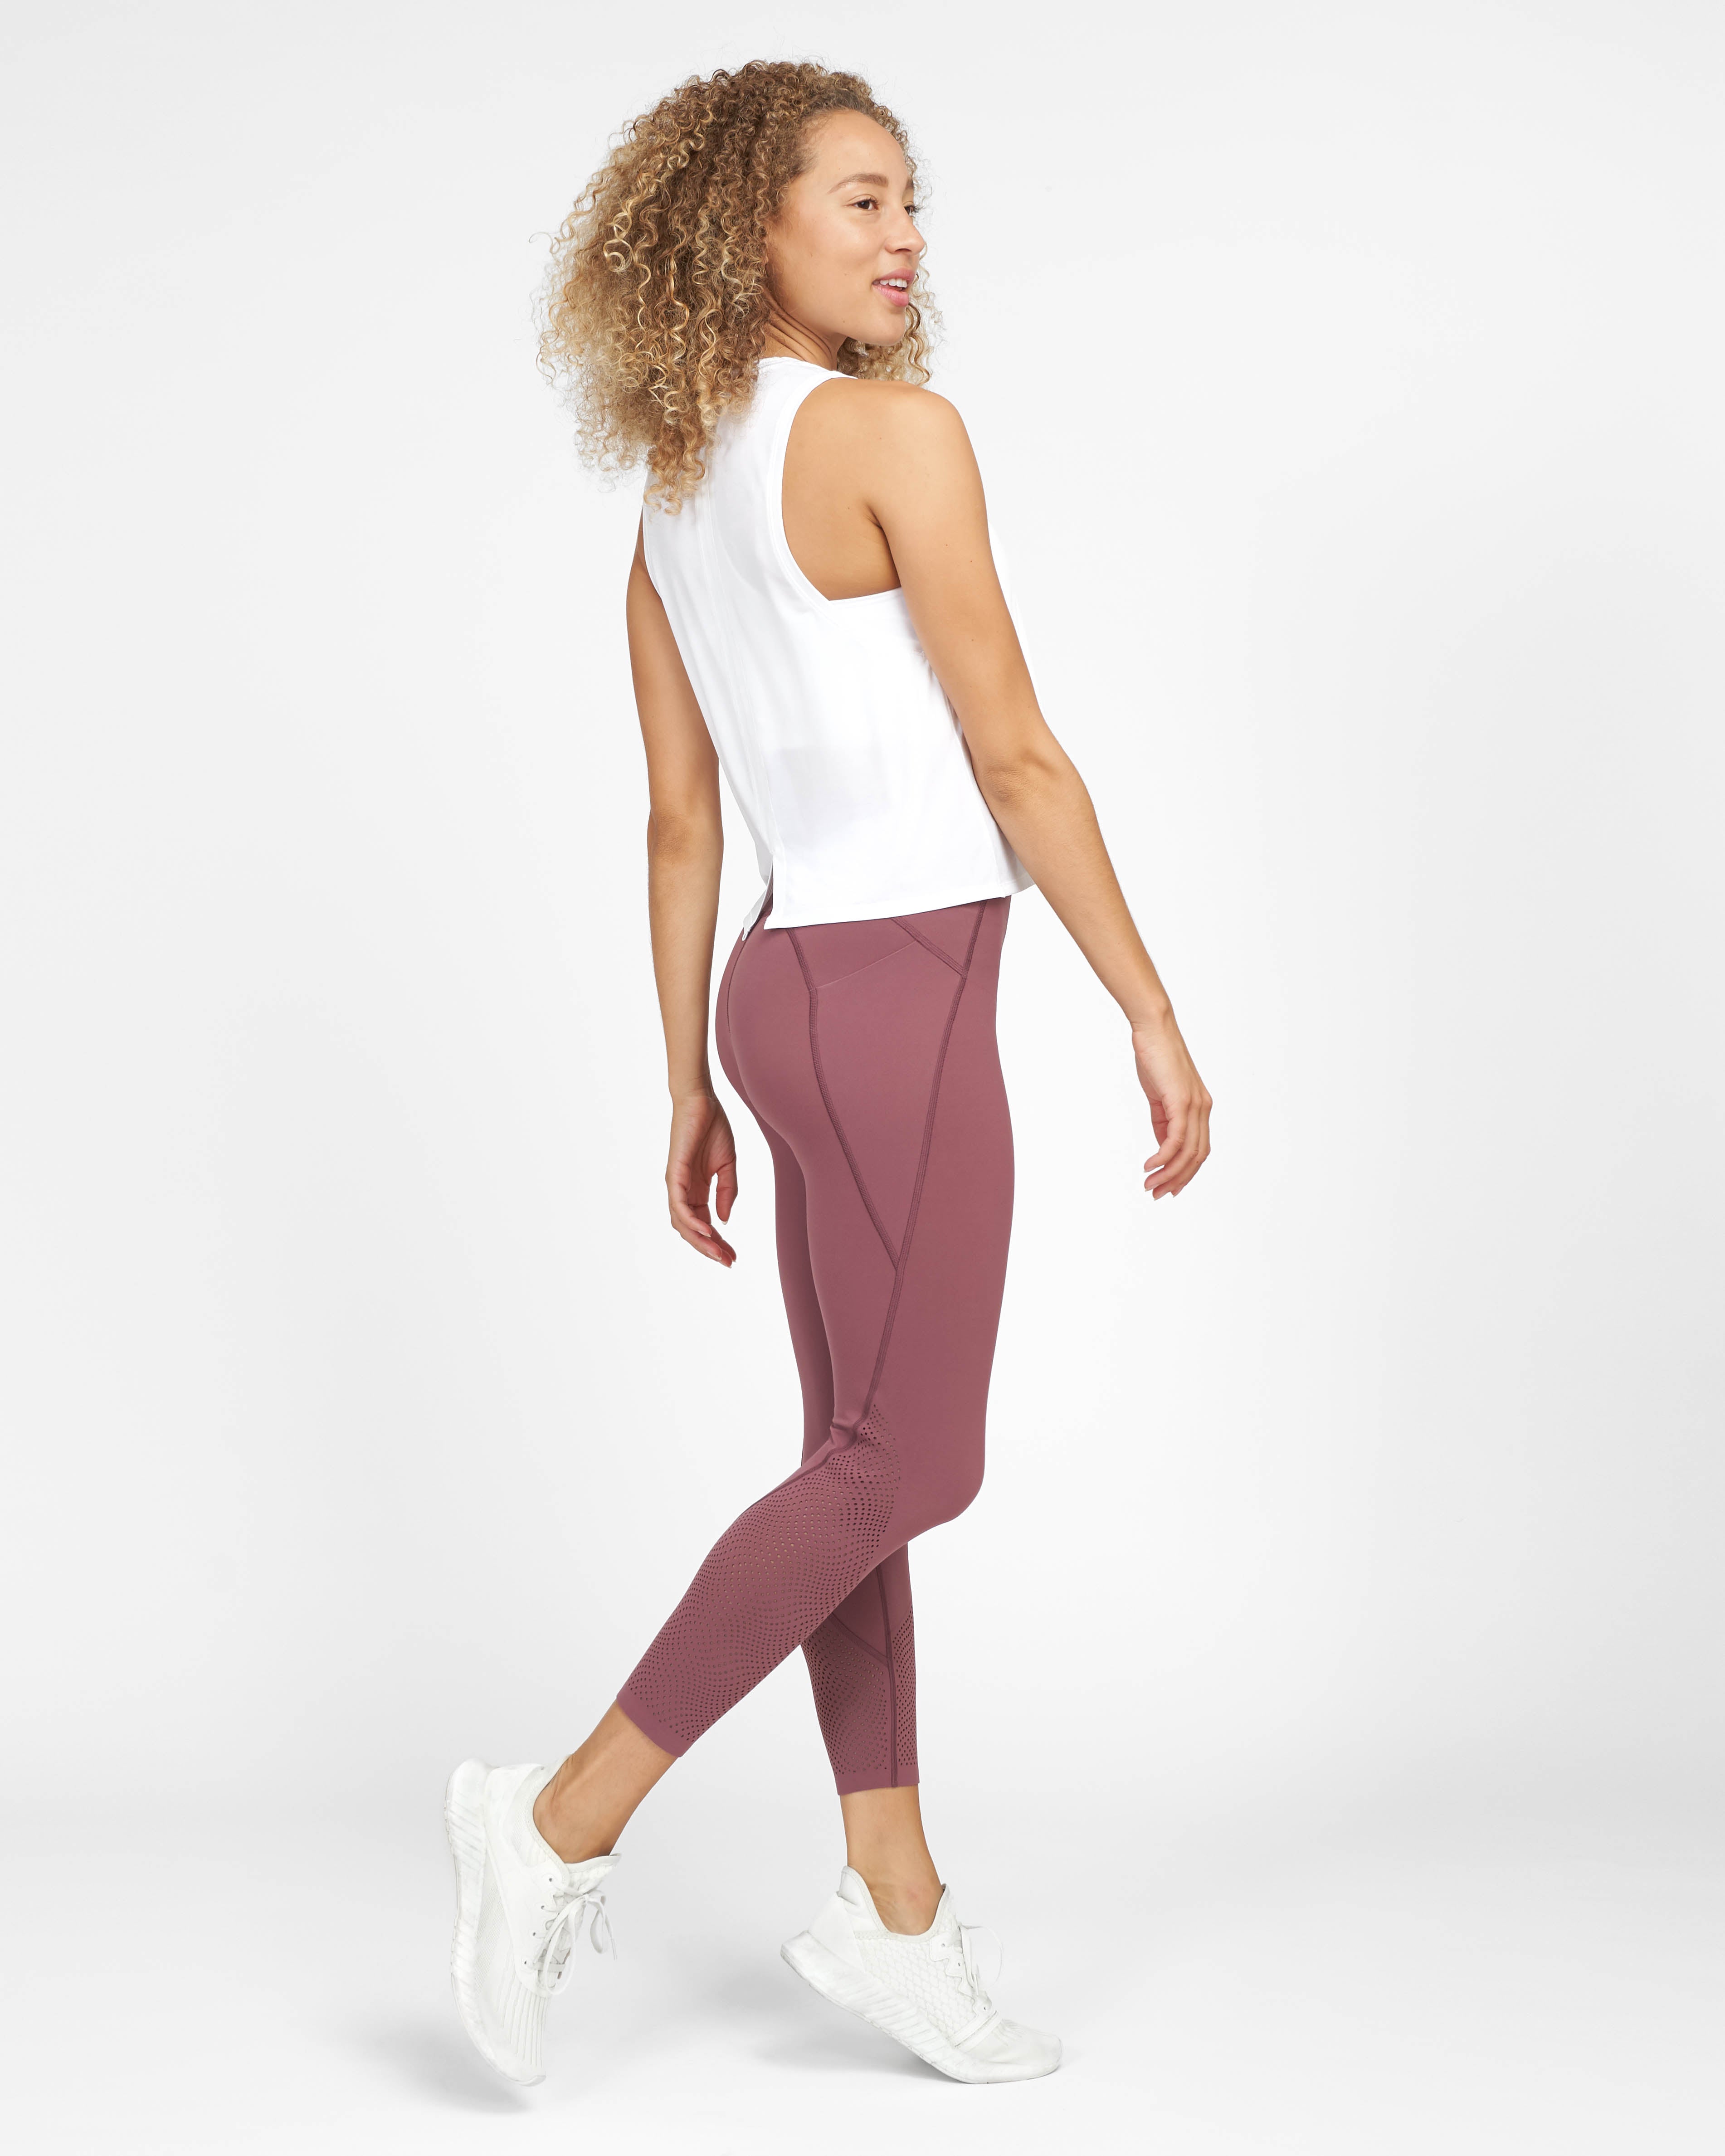 Every.Wear Knockout Leggings  Your favorite do-it-all active